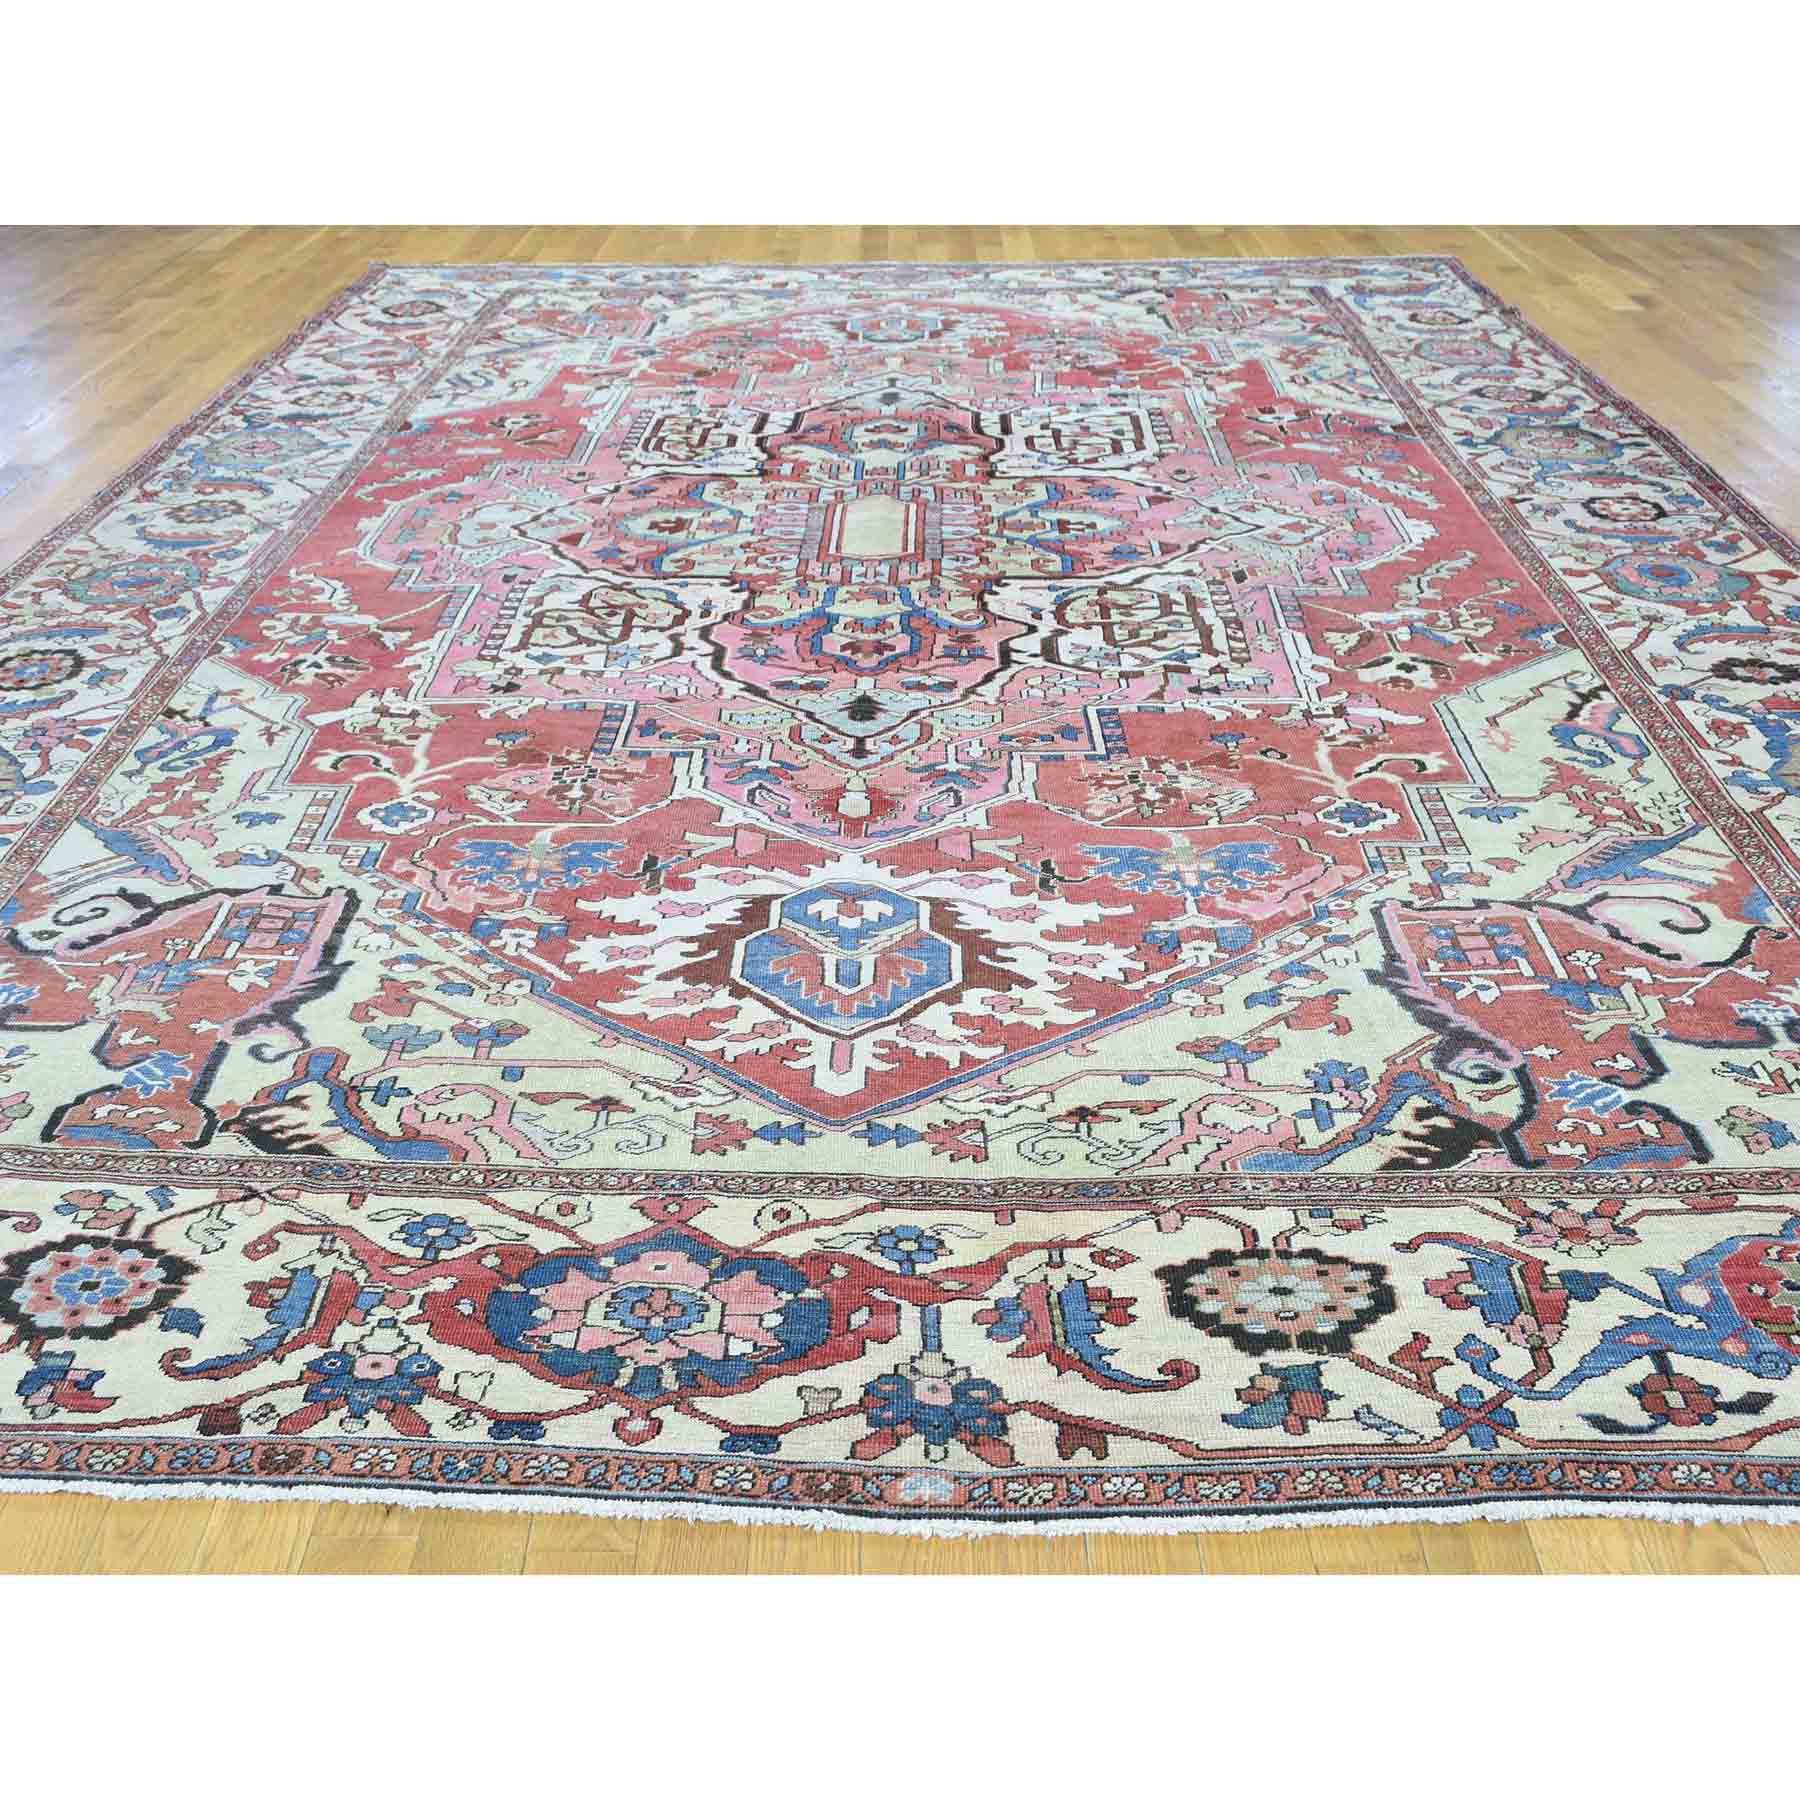 Antique-Hand-Knotted-Rug-172140